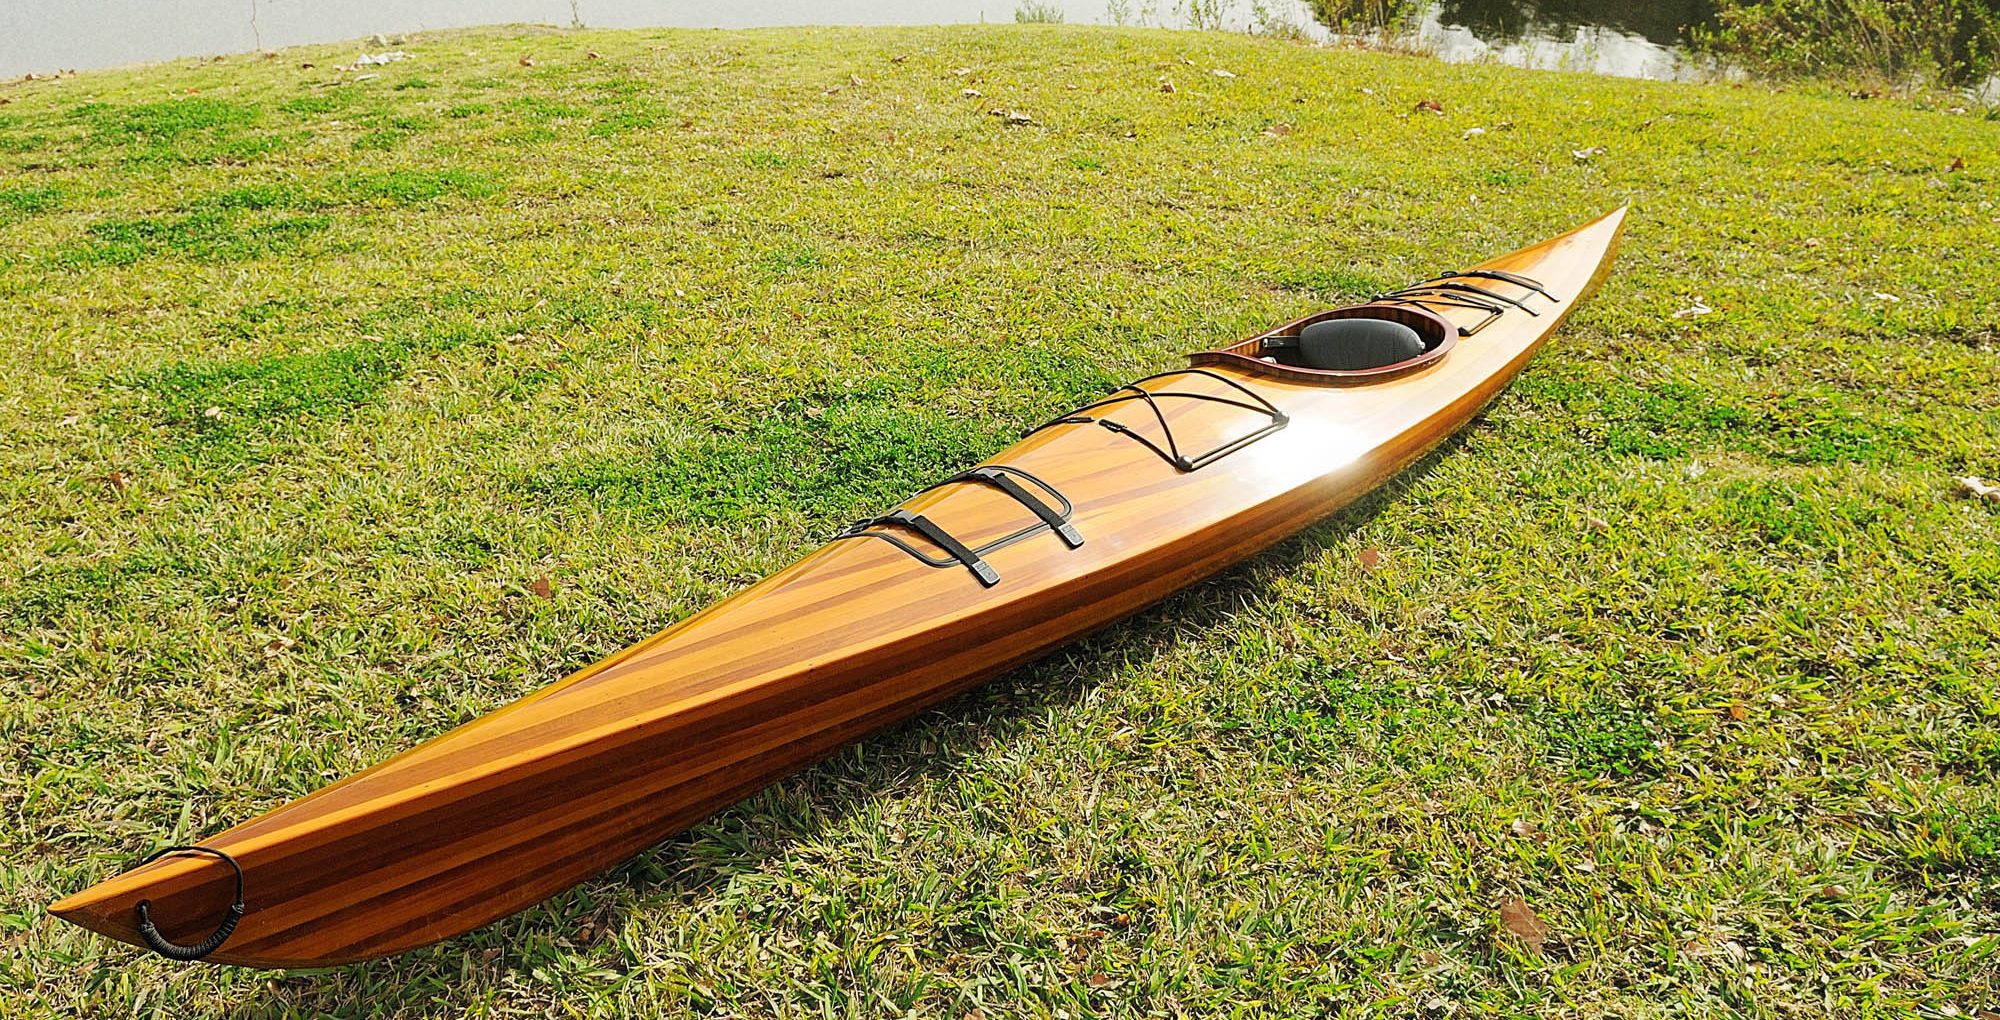 Buy 17 ft 1-person wooden kayak for sale - Wooden Boat USA